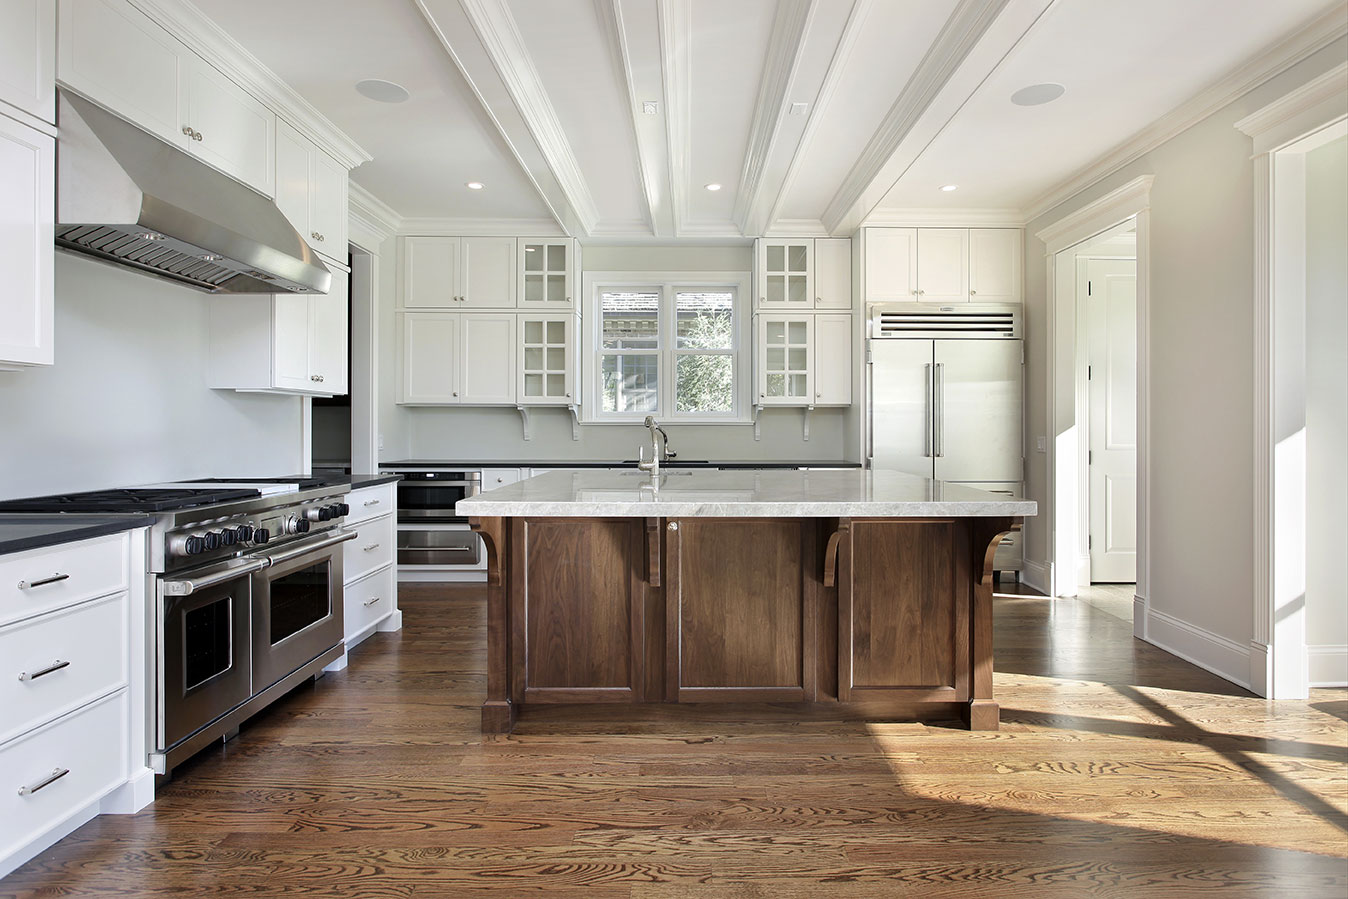 Custom Kitchen coutnertops mixed cabients - US taylorsville